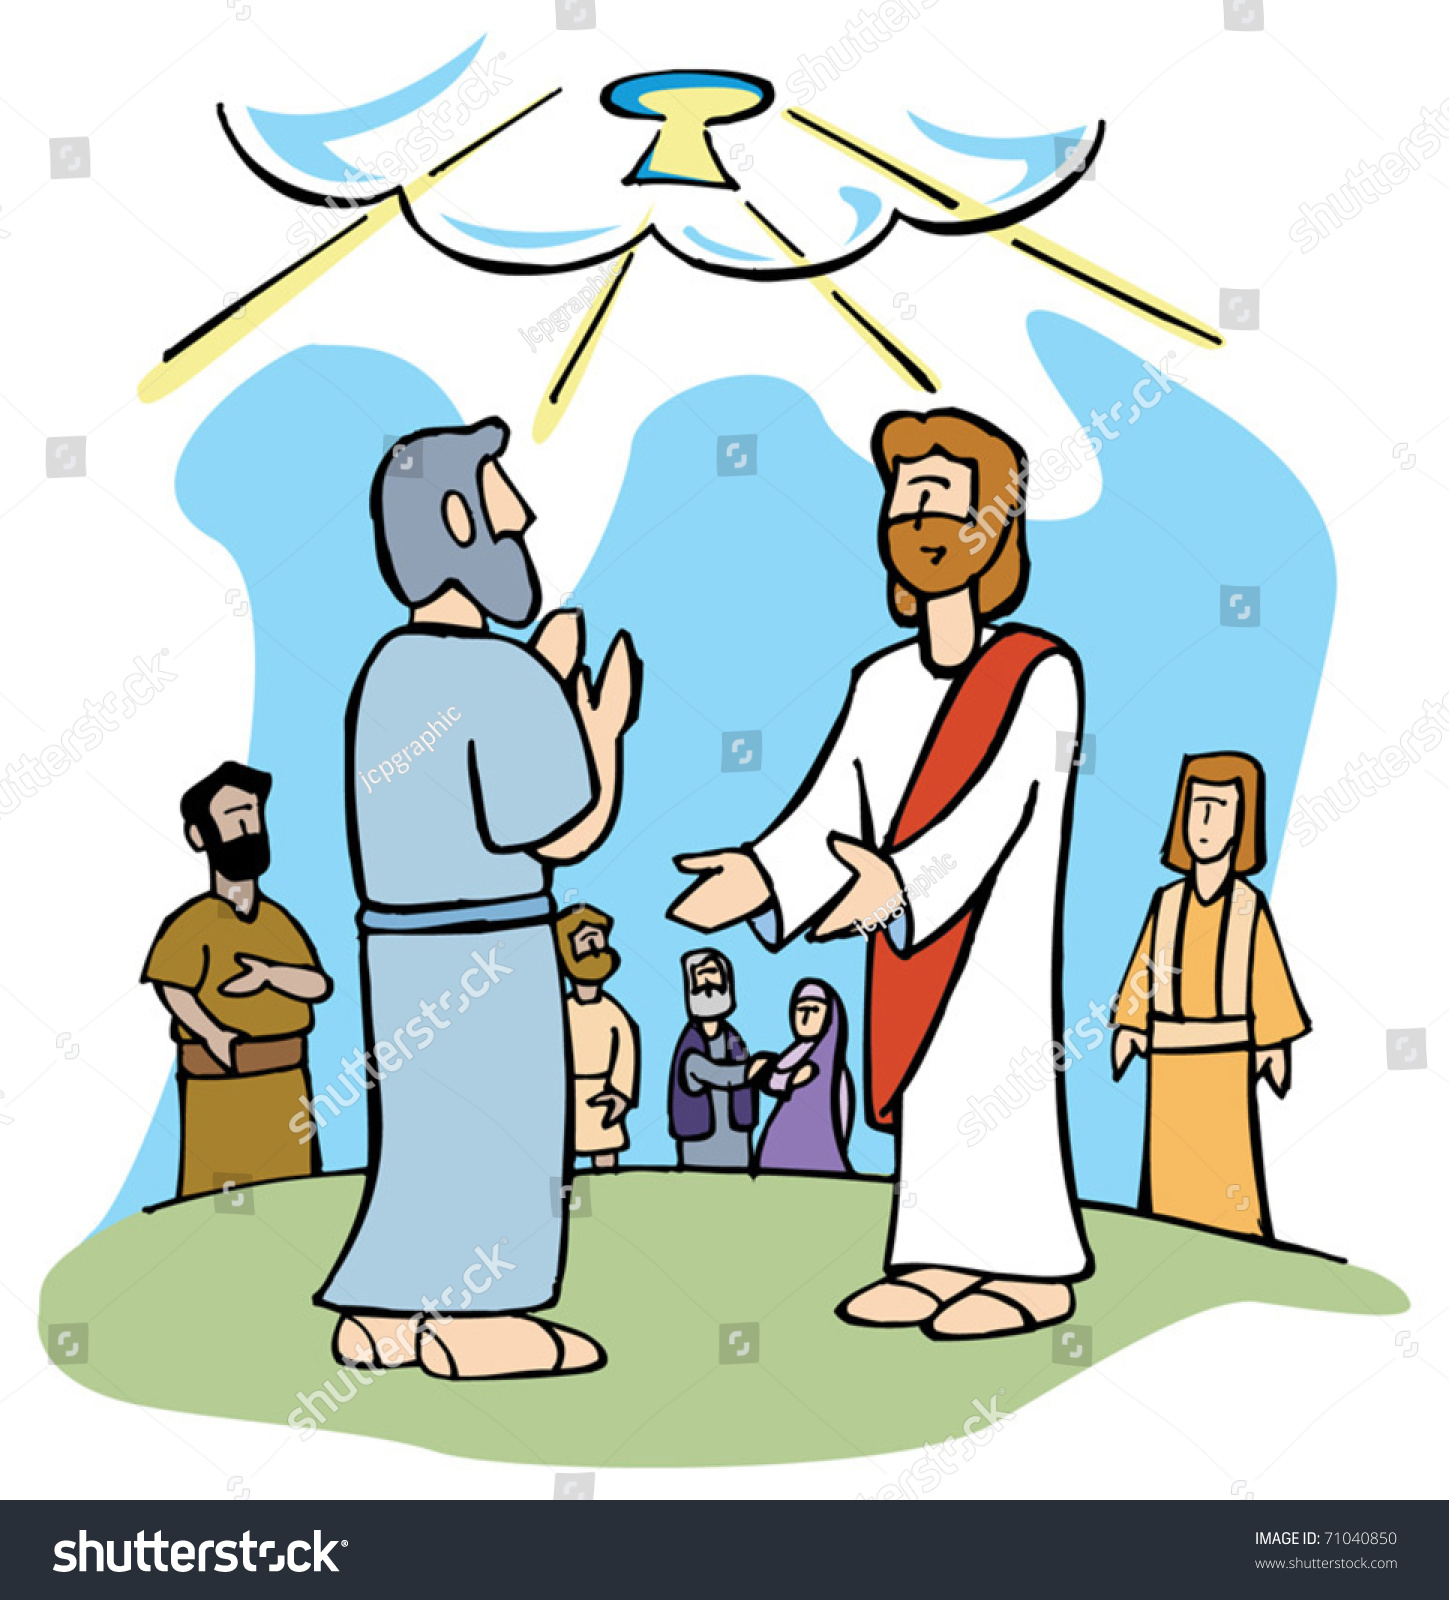 jesus and peter clipart - photo #29